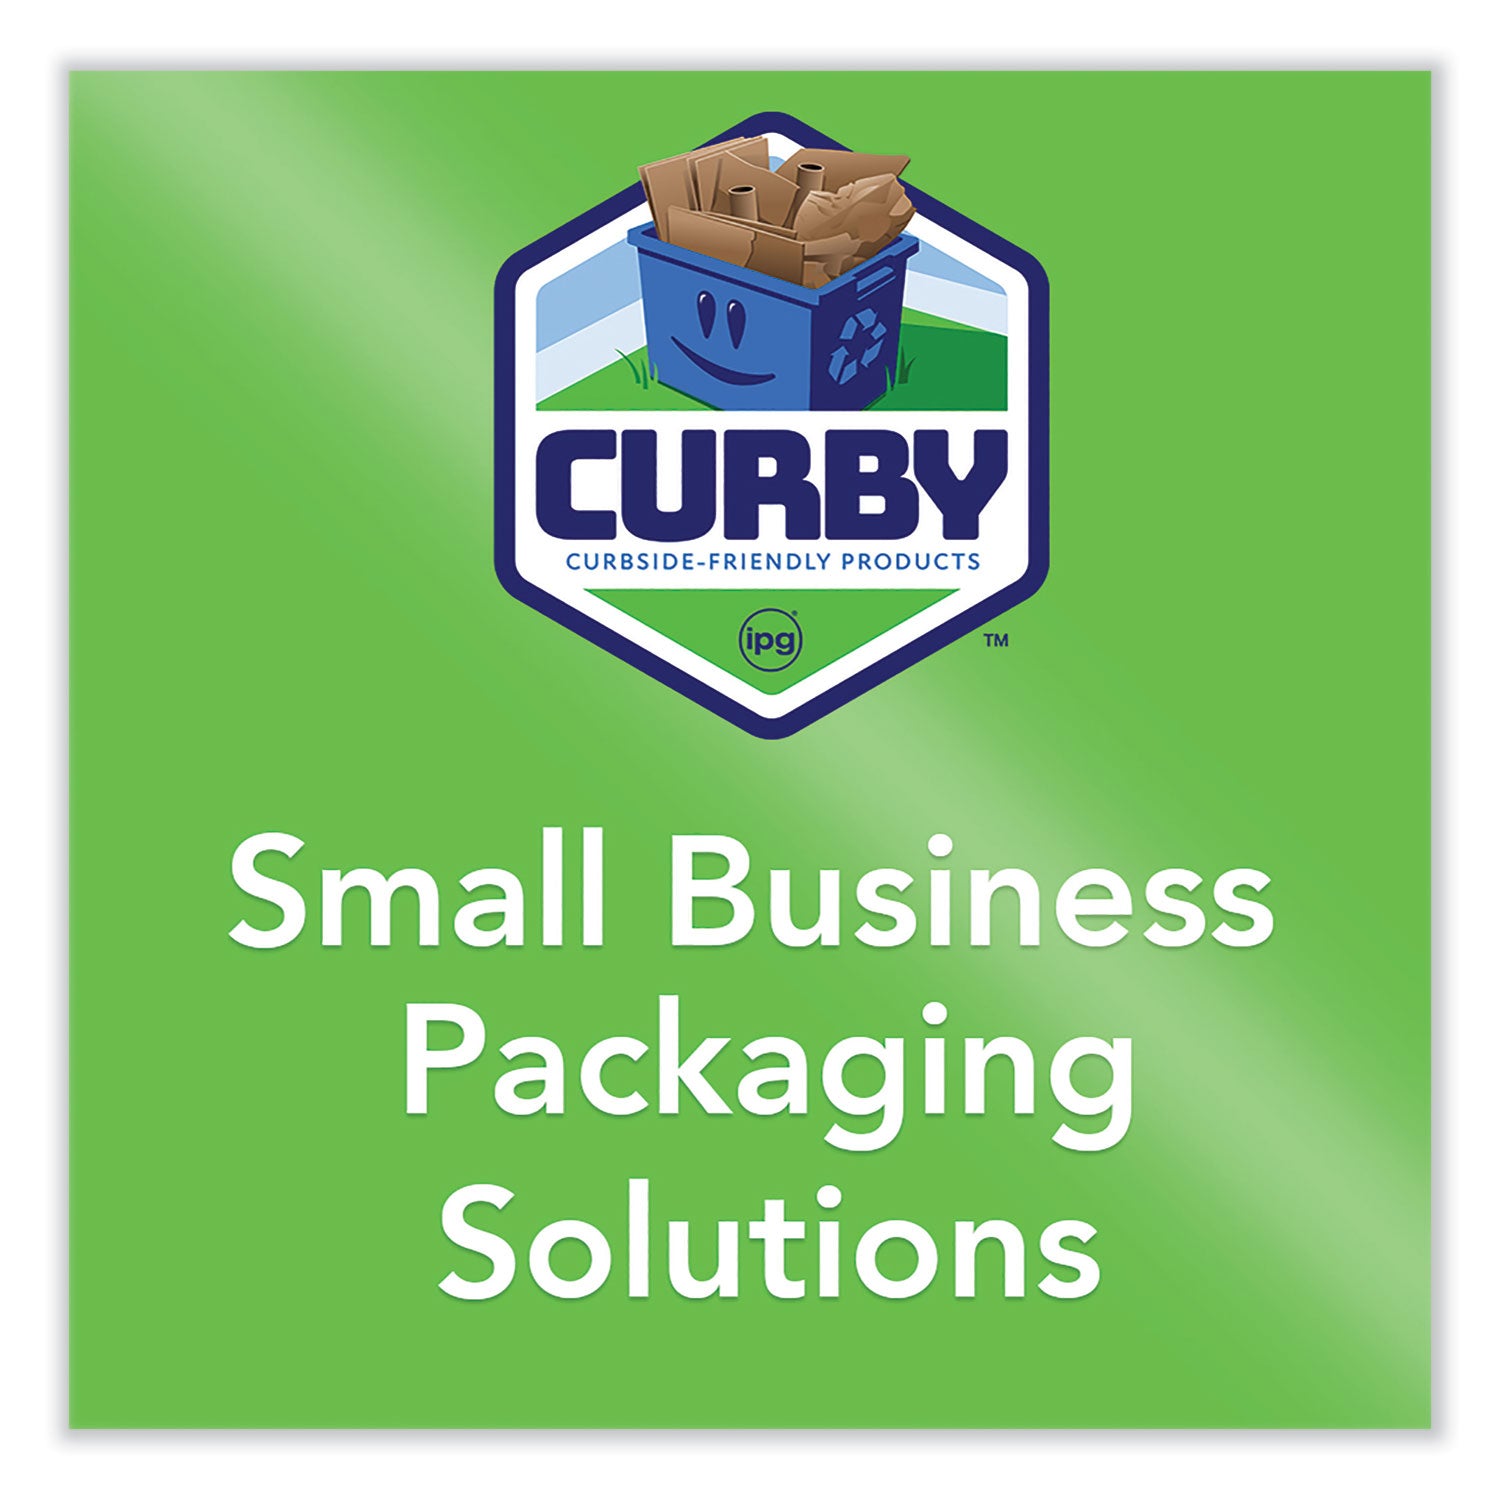 curby-mailer-self-sealing-recyclable-mailer-paper-padding-self-adhesive-#5-1138-x-155-30-carton_ipgcbml5c - 2